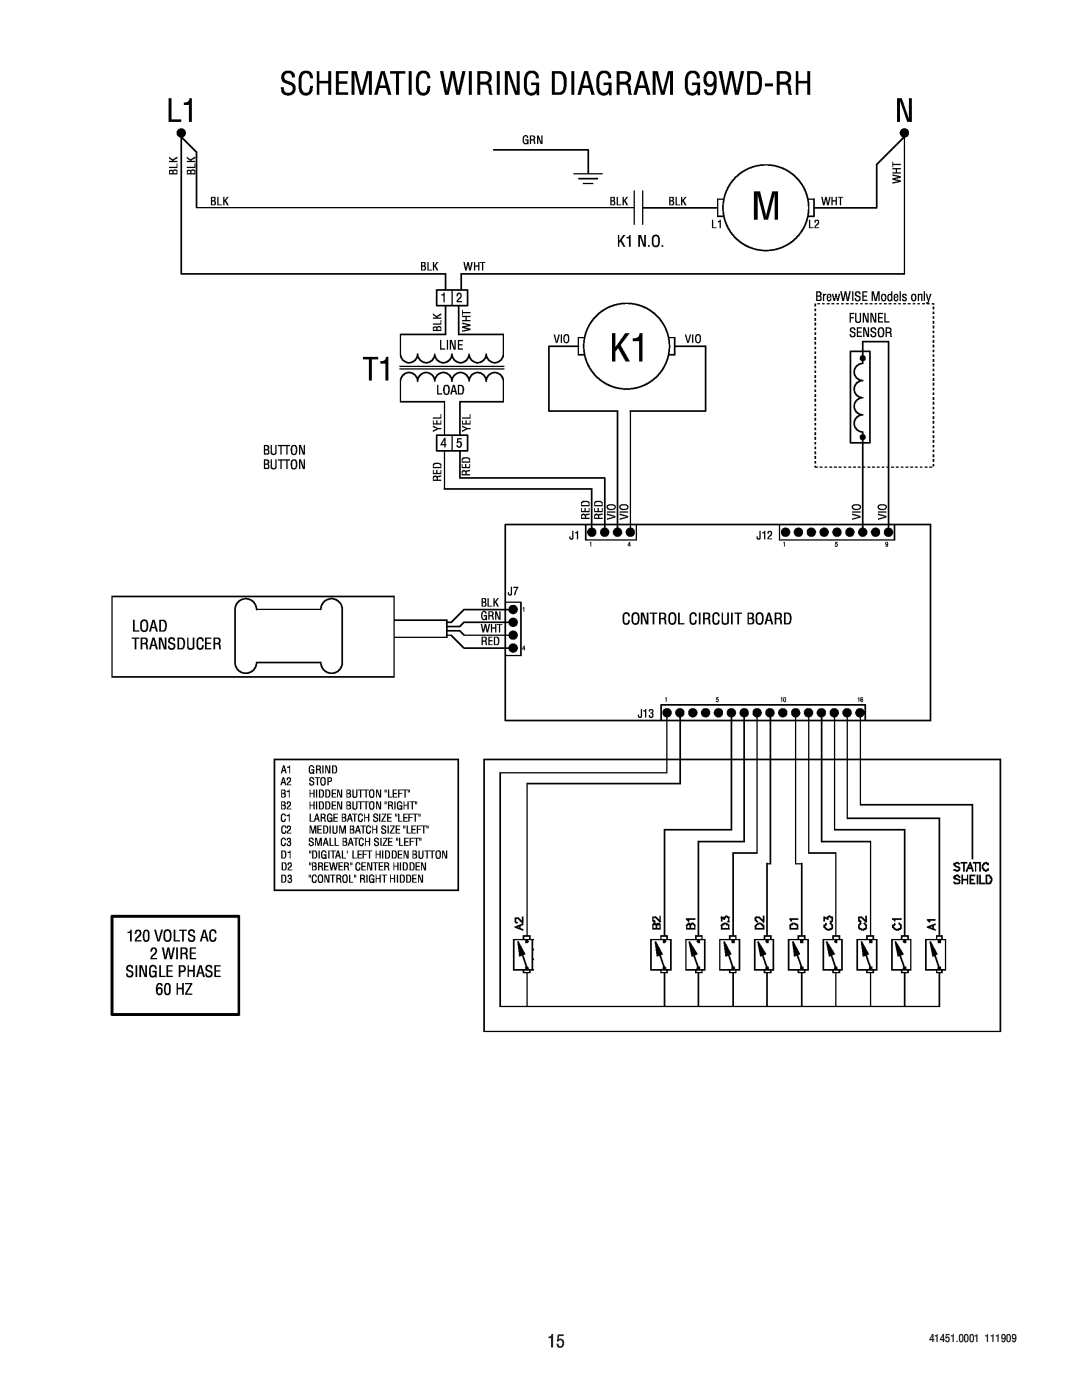 Bunn service manual SCHEMATIC WIRING DIAGRAM G9WD-RH, Load, Transducer, 60 HZ, BrewWISE Models only, Line 